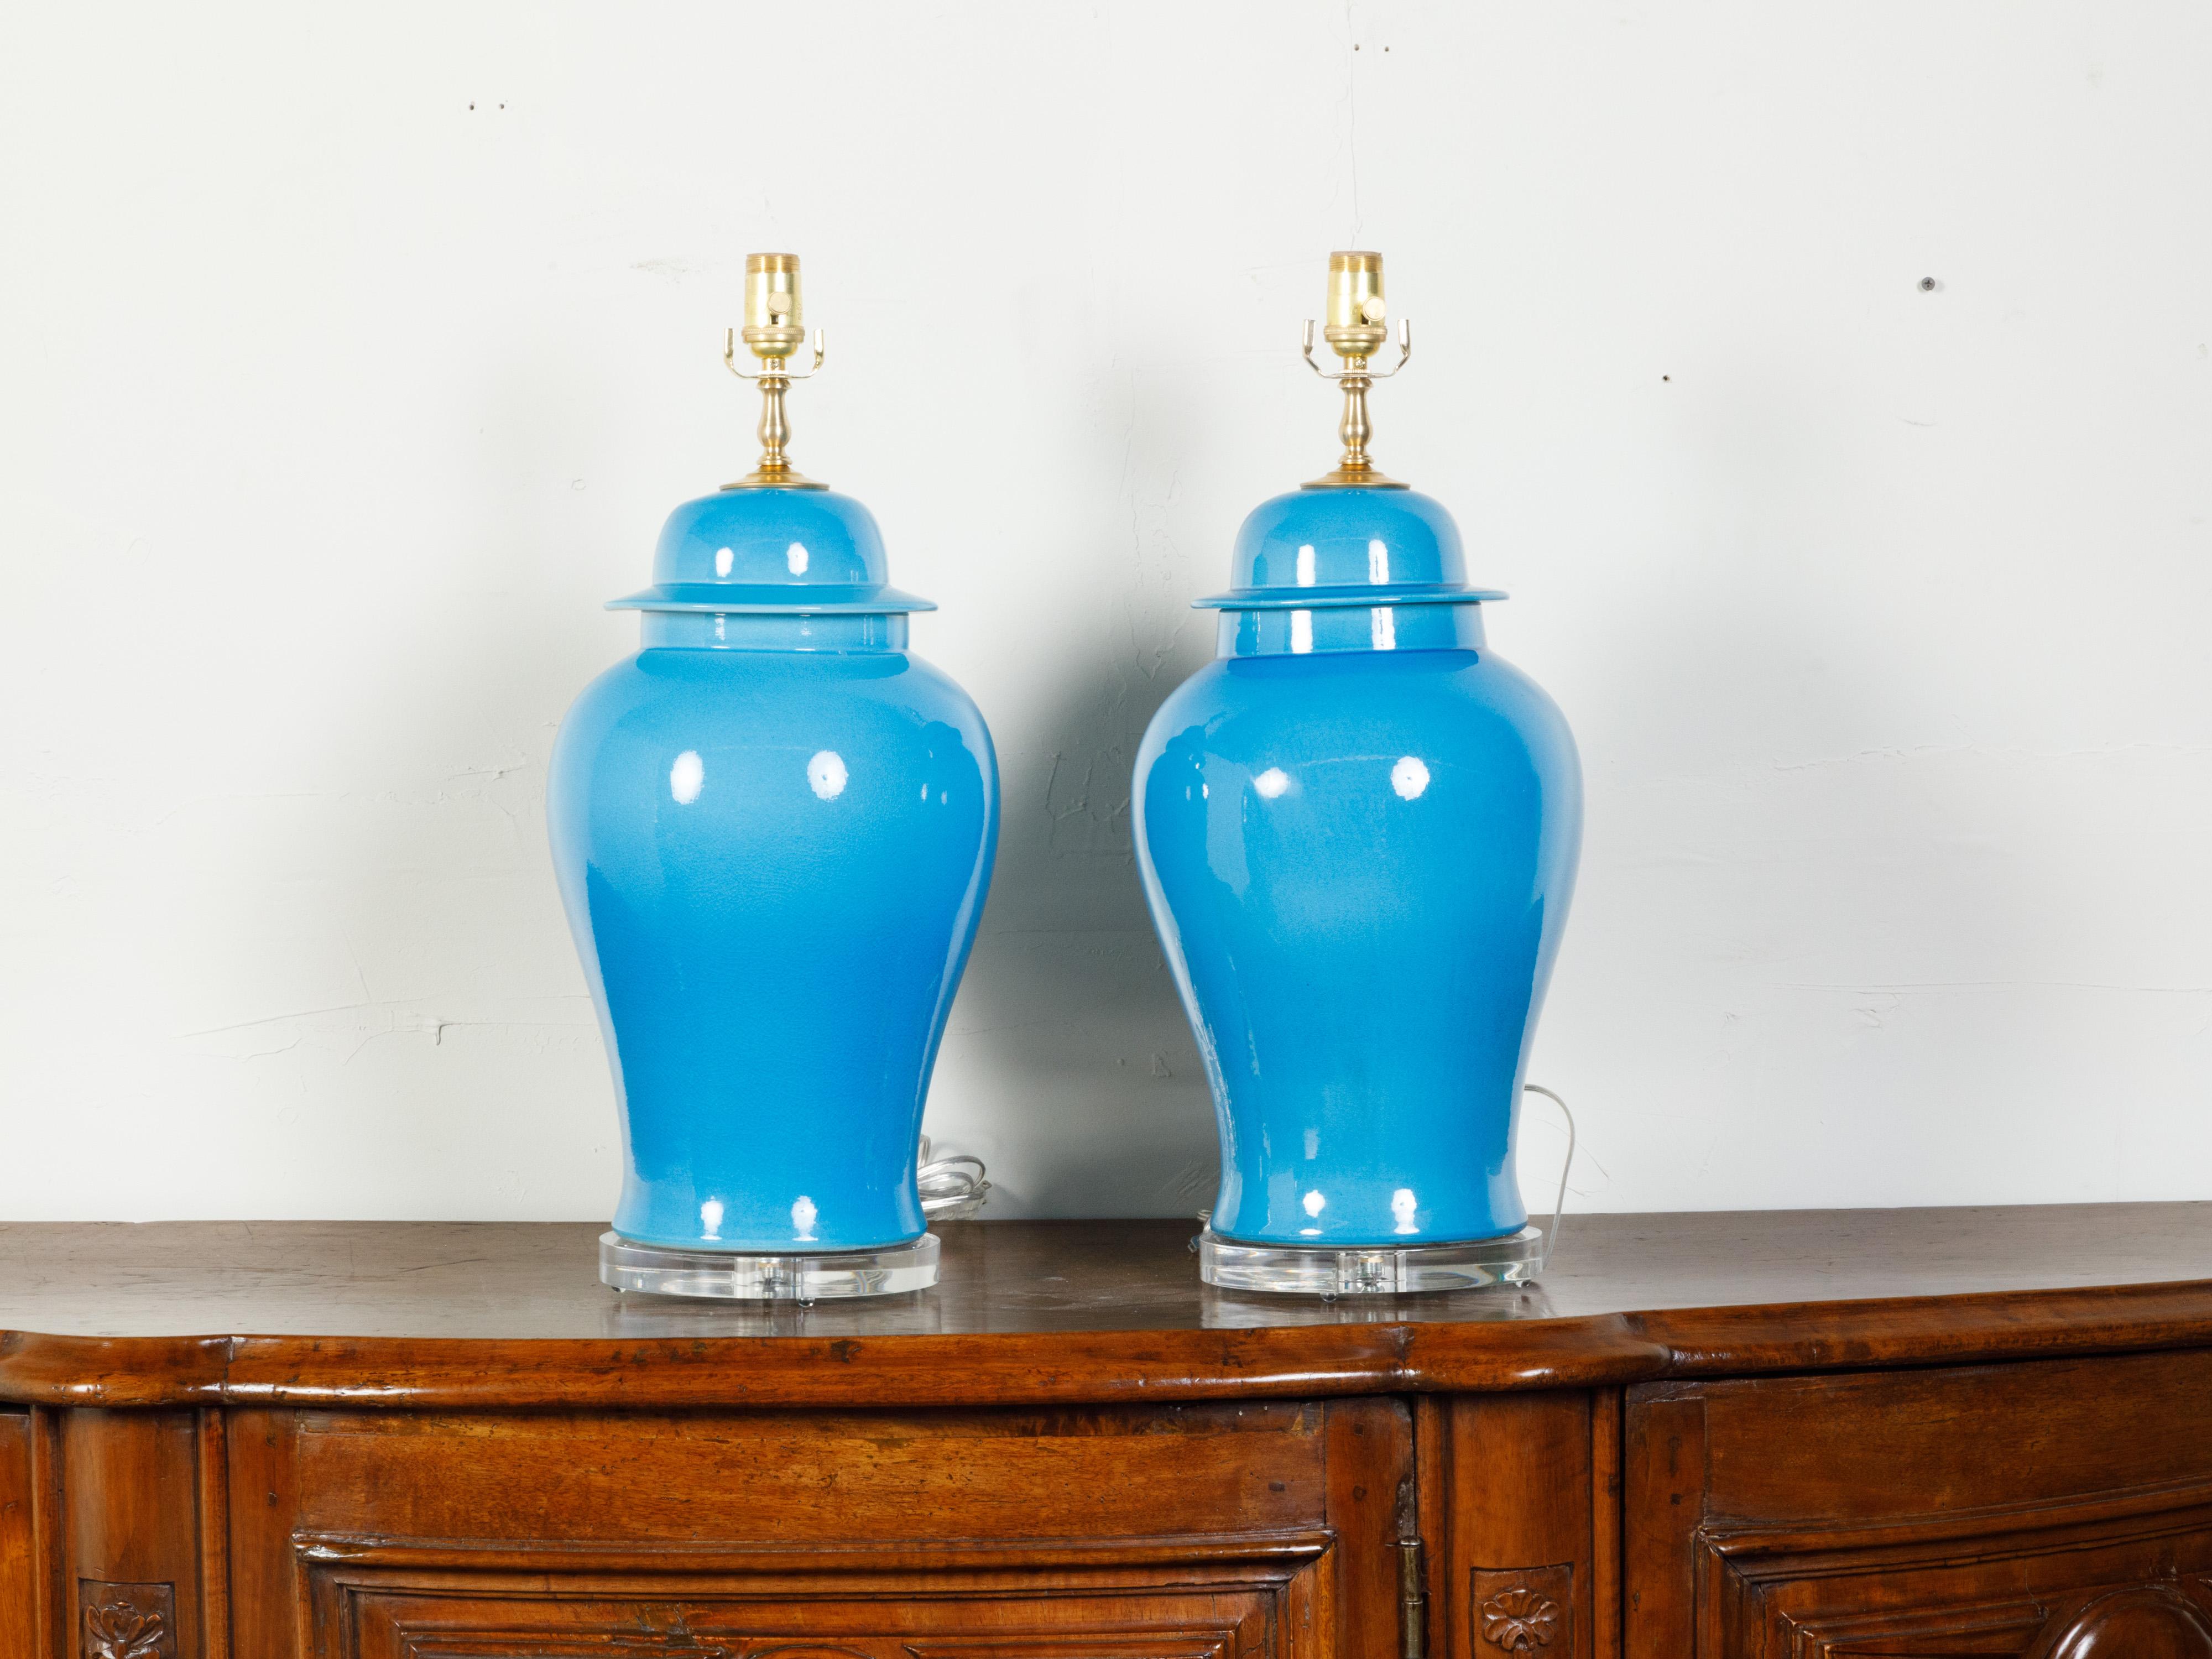 A pair of blue porcelain table lamps from the mid 20th century, made of vases mounted on lucite bases. Created during the midcentury period, each of this pair of table lamps features a blue porcelain vase topped with domed lids. Showcasing tapering